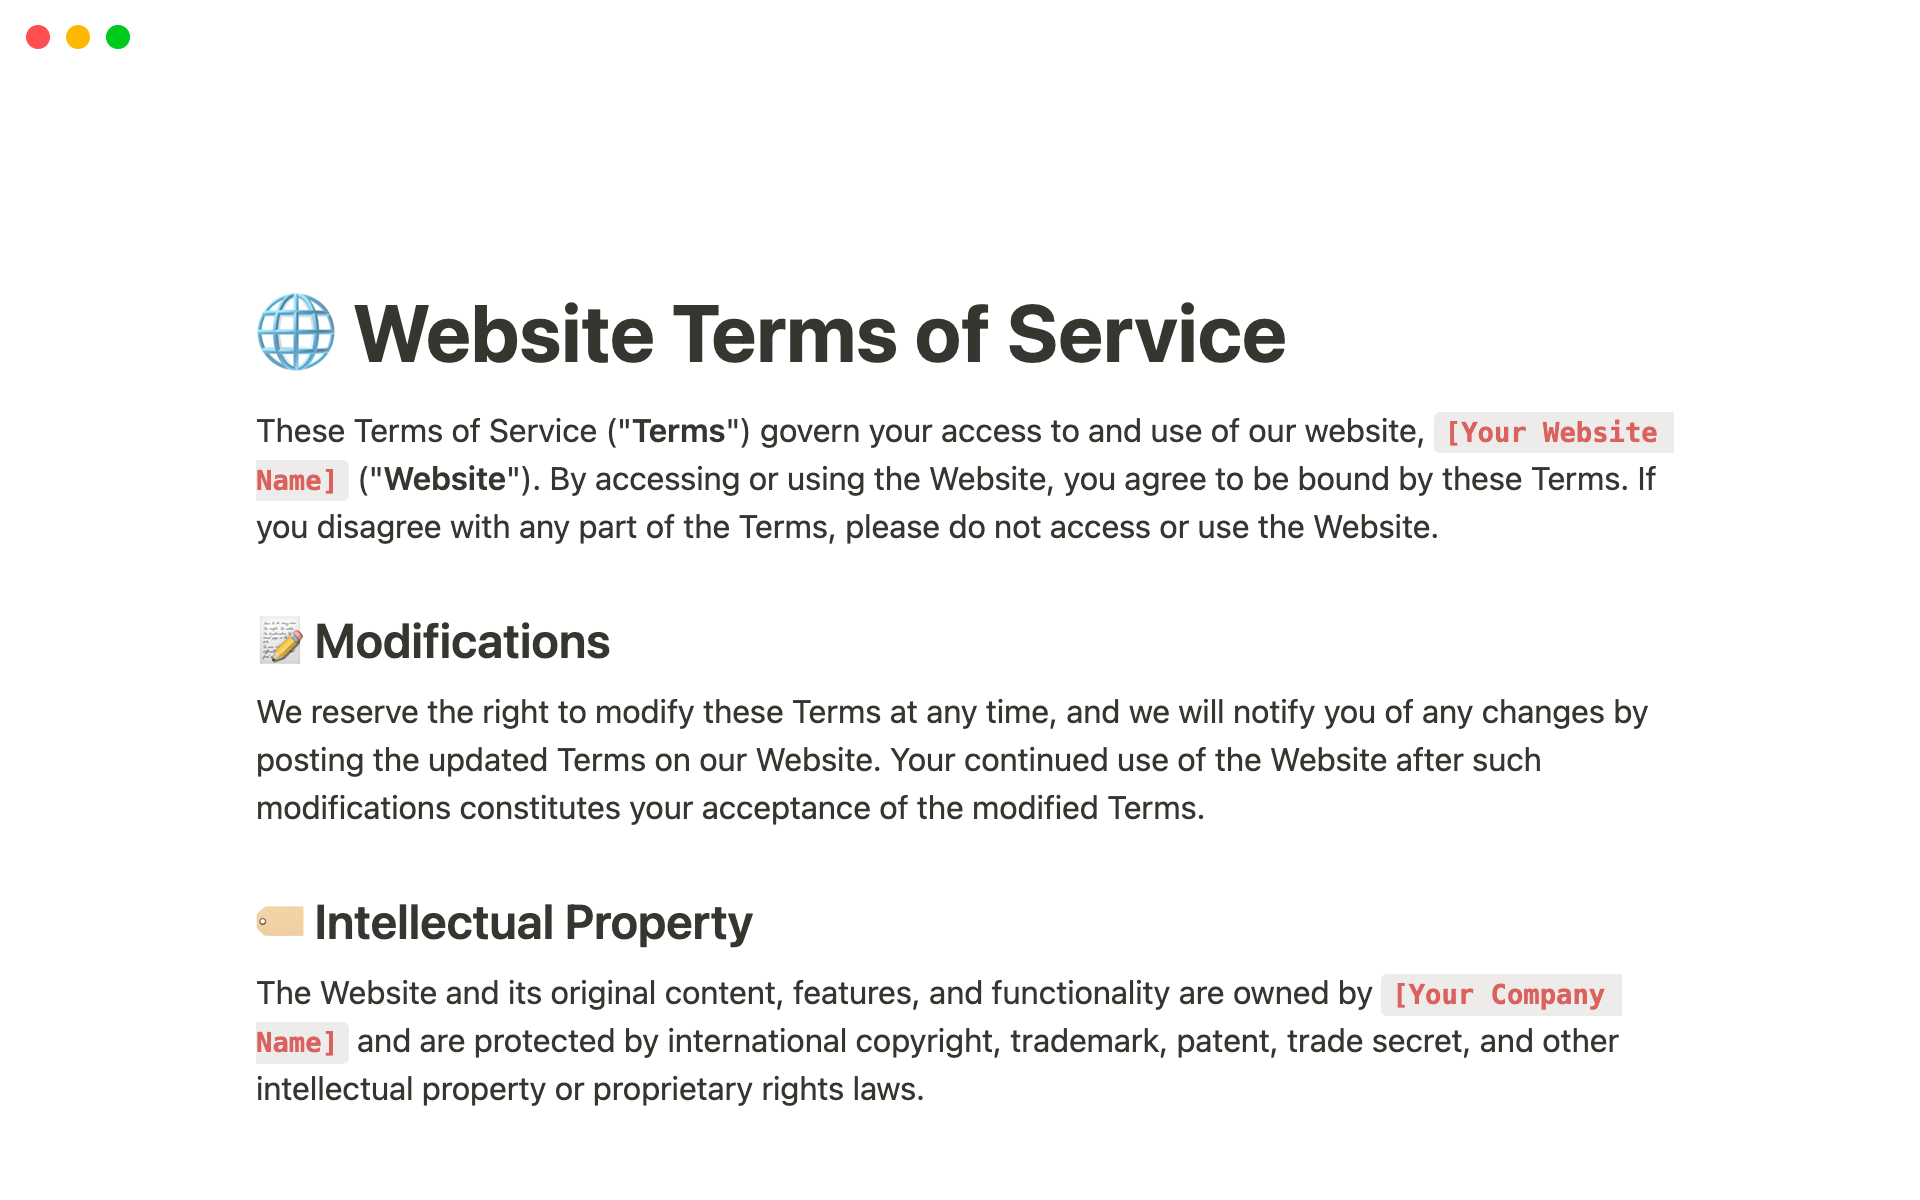 A comprehensive template for website owners, outlining the rules and guidelines for using their site, with customizable sections for disclaimers, user conduct, and more.